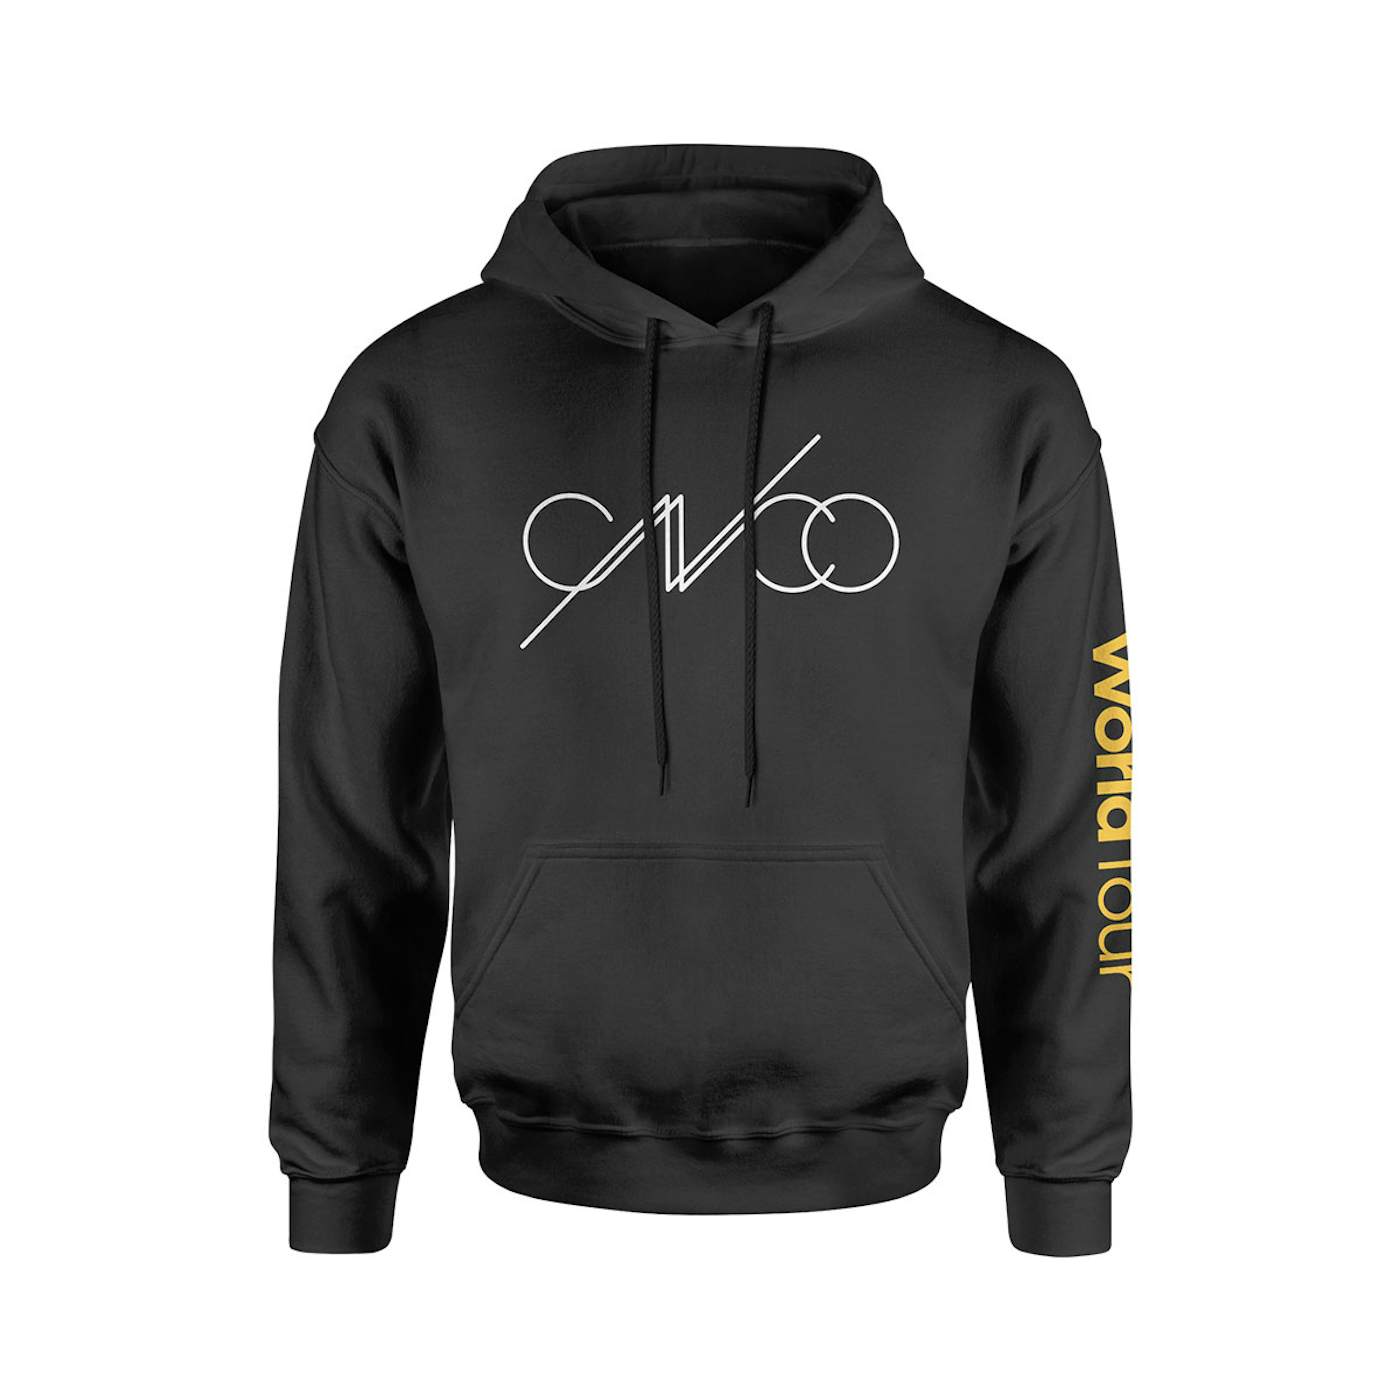 CNCO - World Tour Black Pullover Hoodie